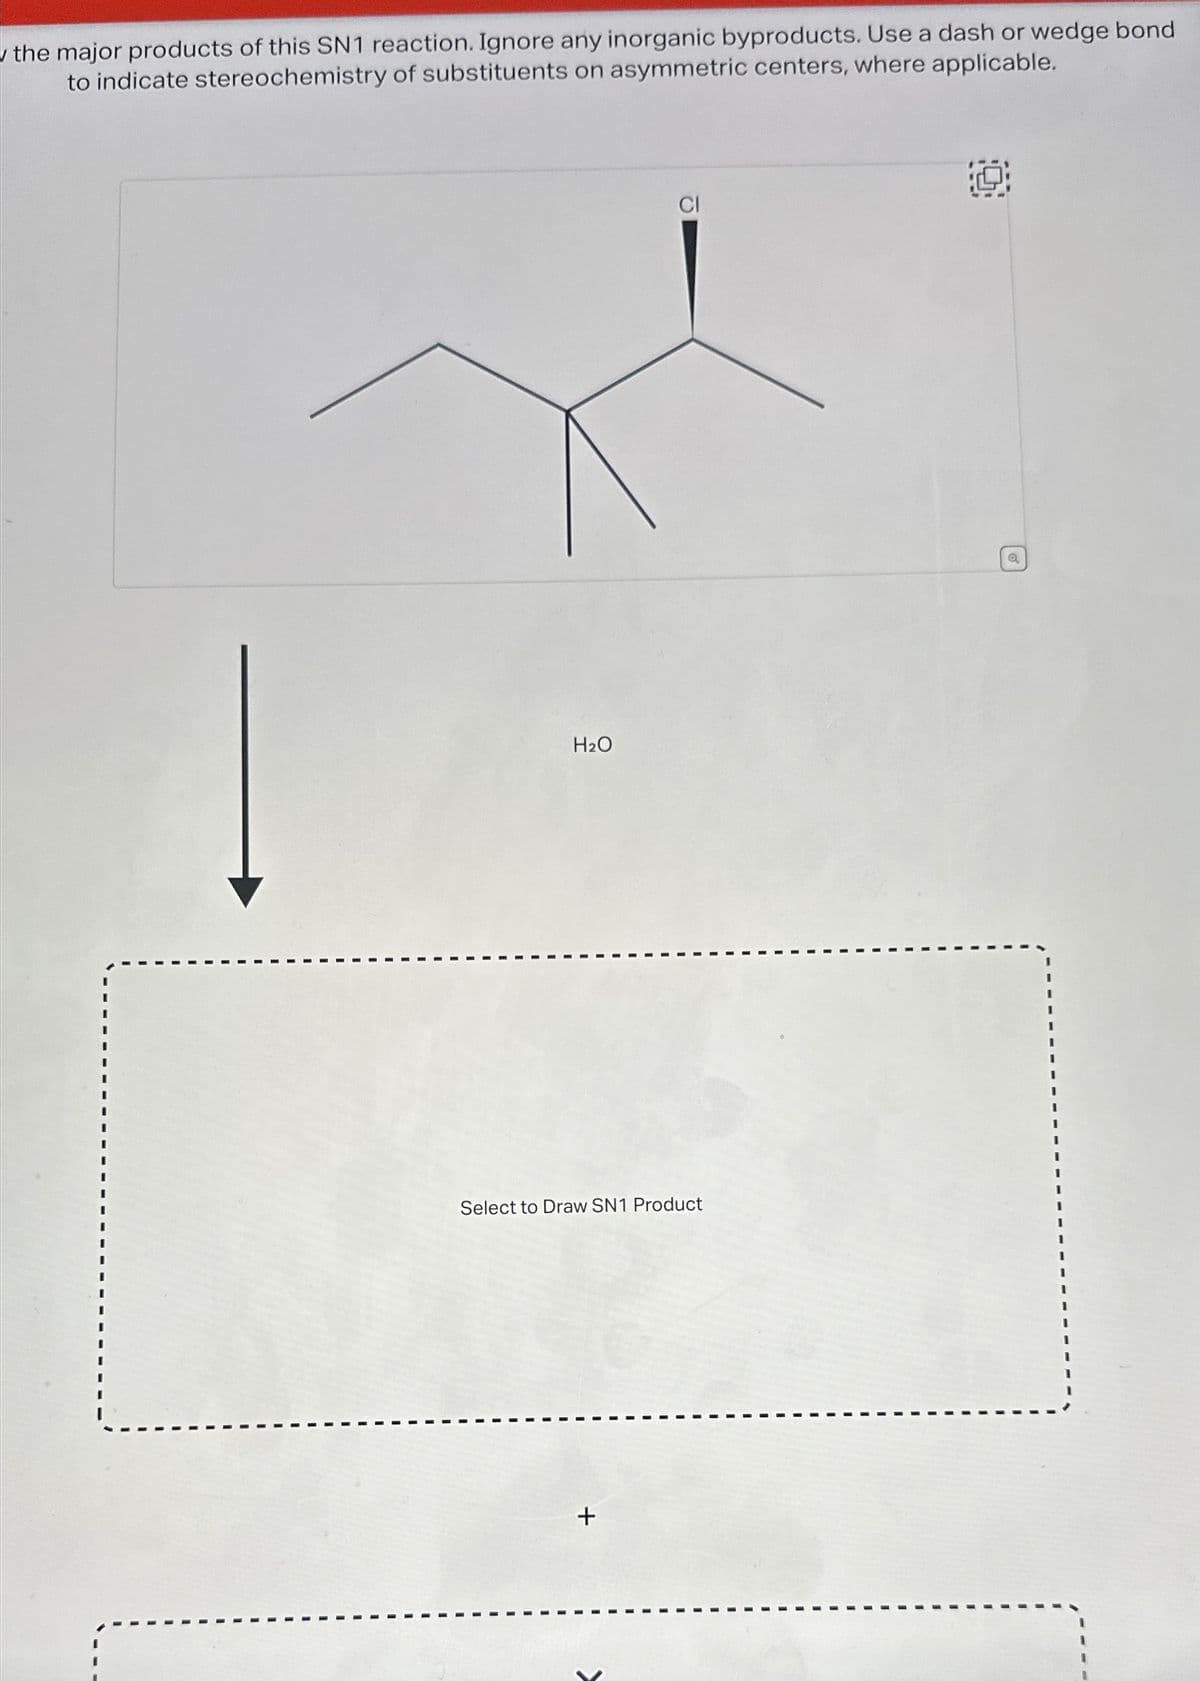 the major products of this SN1 reaction. Ignore any inorganic byproducts. Use a dash or wedge bond
to indicate stereochemistry of substituents on asymmetric centers, where applicable.
H₂O
CI
Select to Draw SN1 Product
+
O
Q